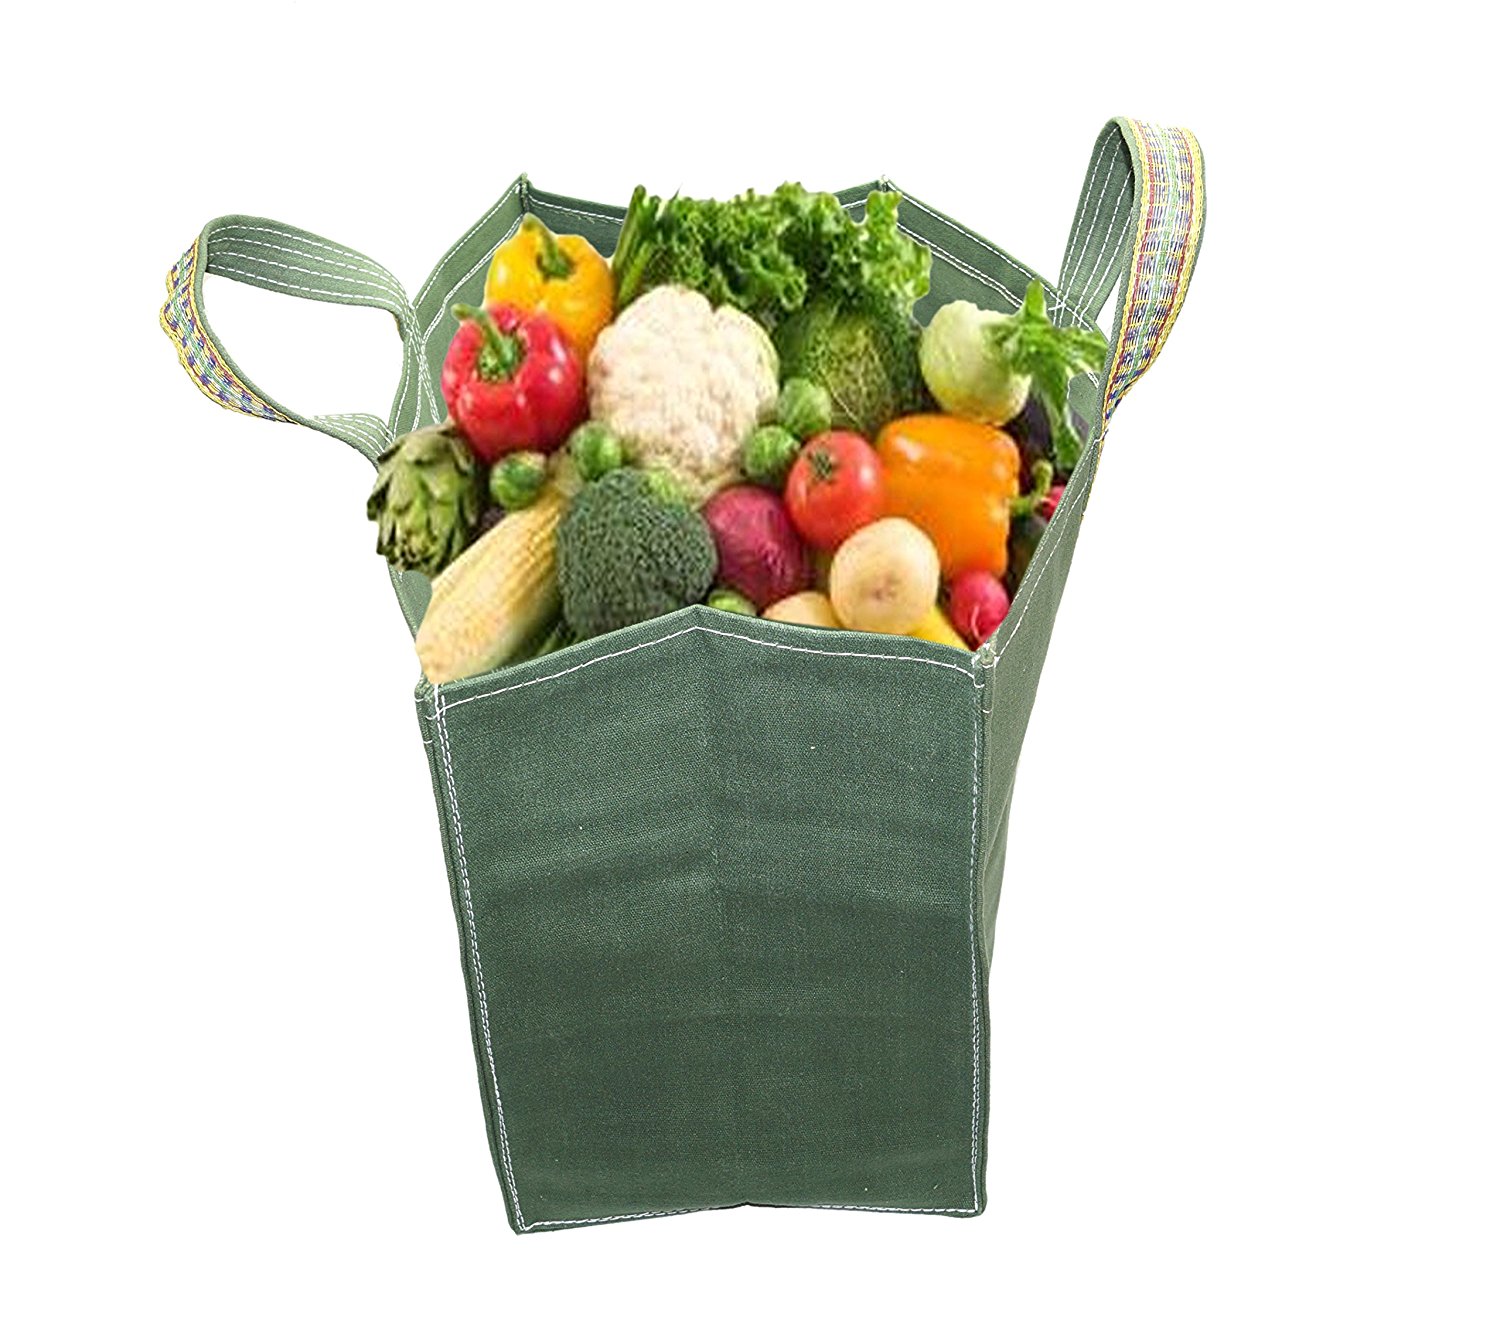 KUBER INDUSTRIES Rexine Fruit/Vegetable/Grocery Carry Bag (Cream) Set of 1  Pc Price in India - Buy KUBER INDUSTRIES Rexine Fruit/Vegetable/Grocery Carry  Bag (Cream) Set of 1 Pc online at Flipkart.com